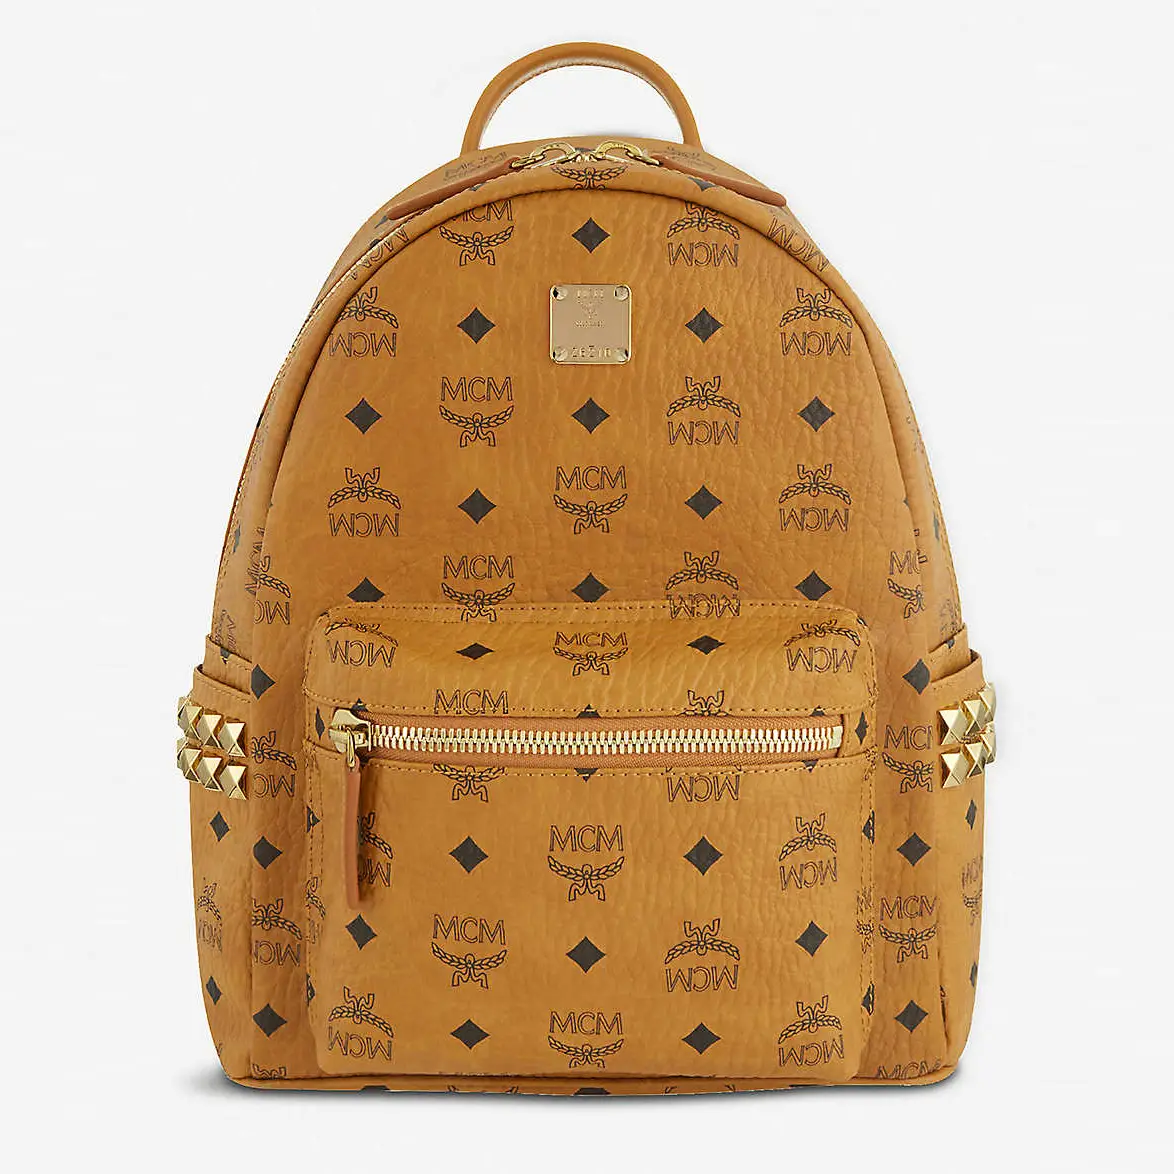 Designer Backpacks That Are Worth Every. Single. Penny | The Sole Supplier